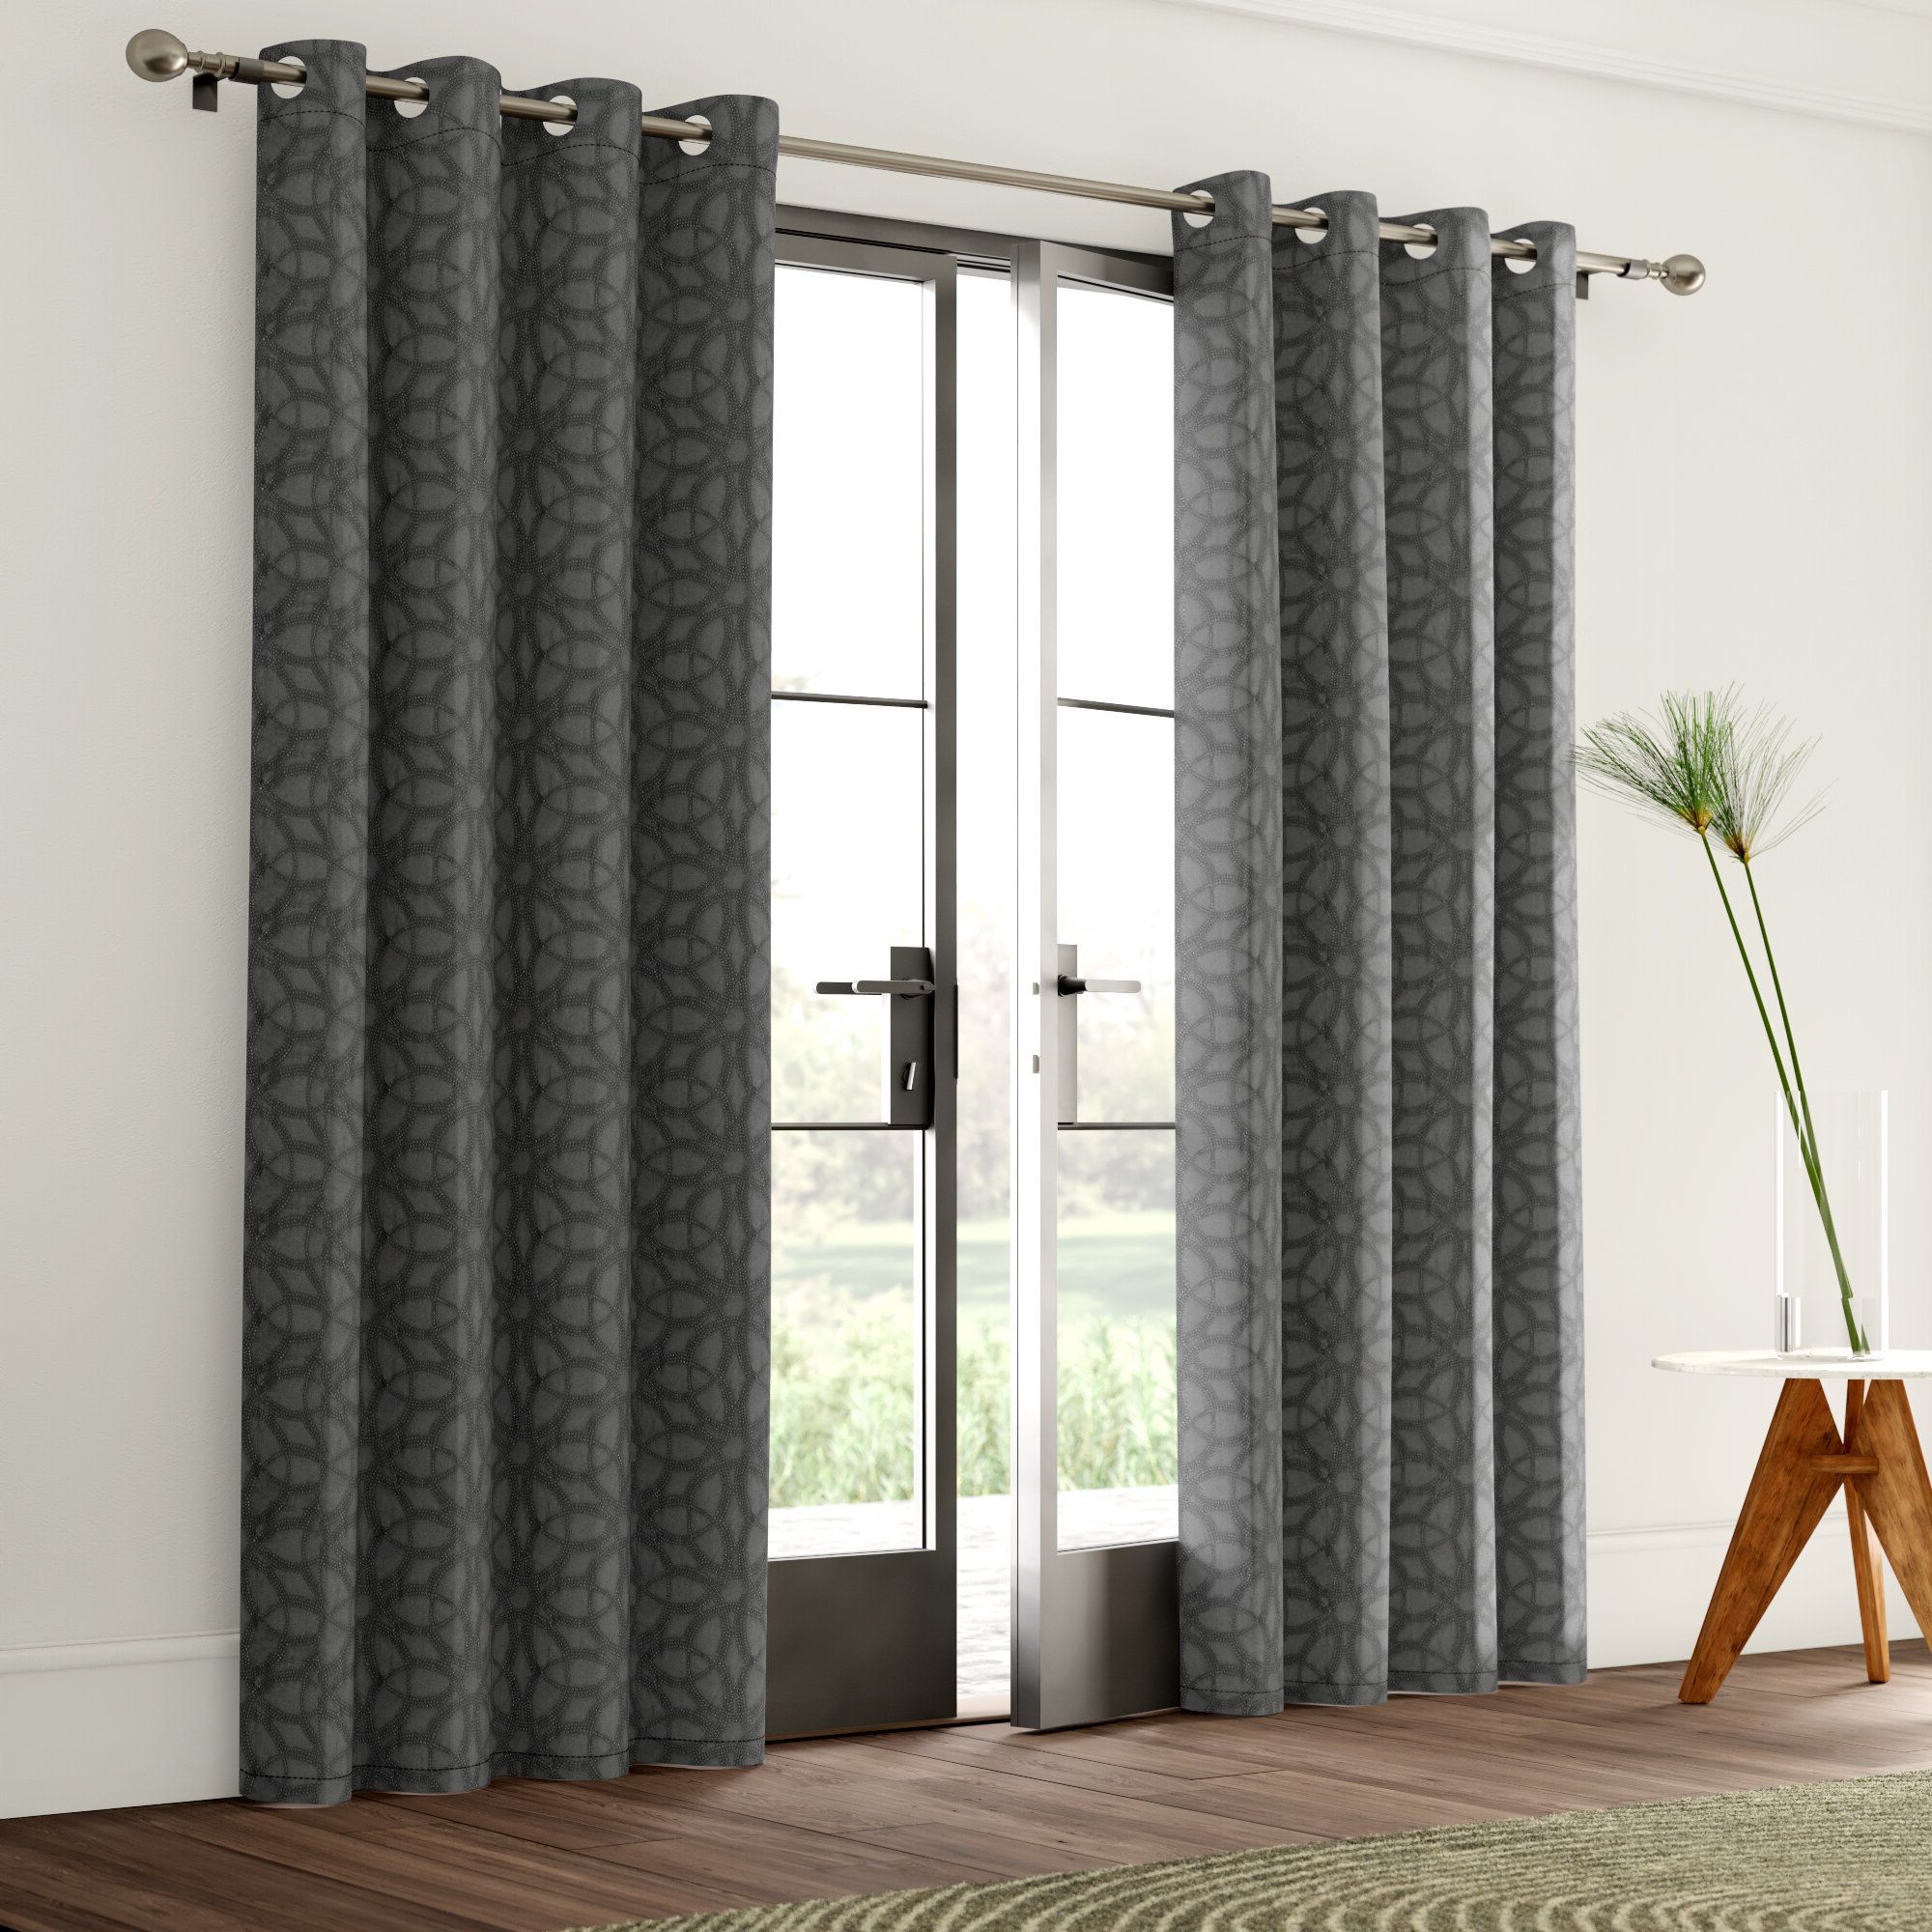 Thermaweave Blackout Curtains Intended For Newest Mercury Row Shively Thermaweave Geometric Blackout Thermal (View 19 of 20)